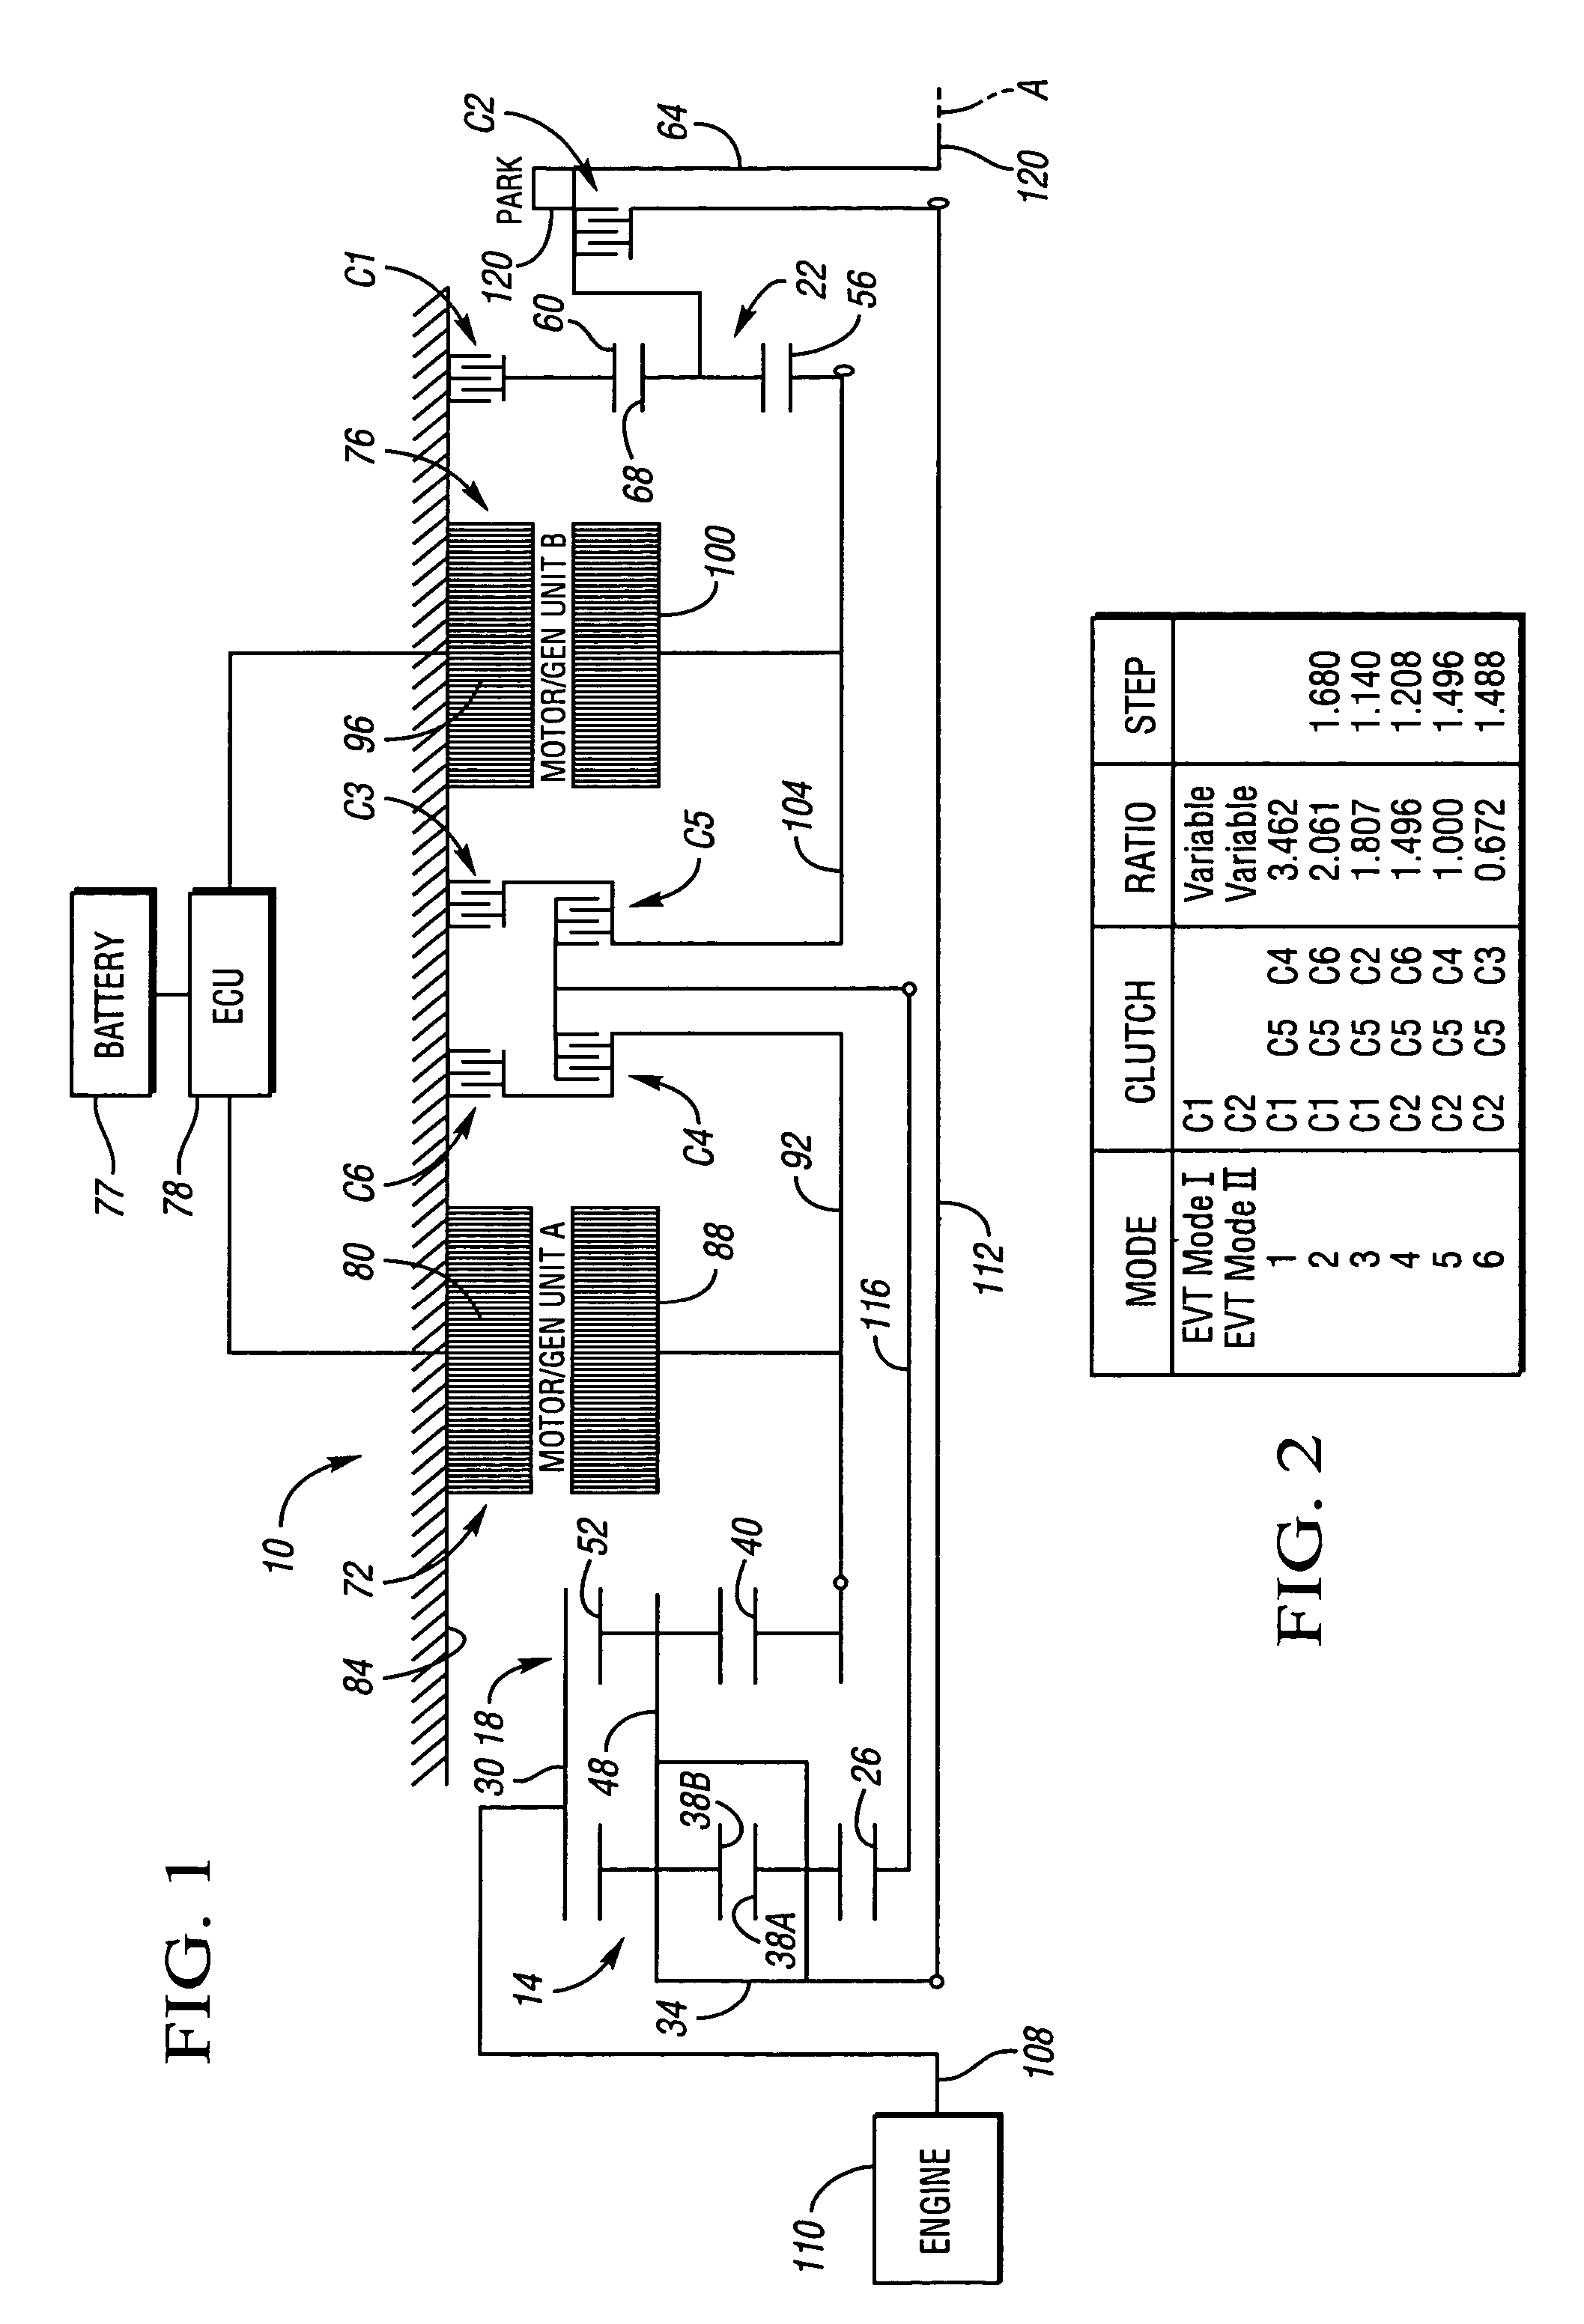 Electrically variable transmission having six fixed speed ratios